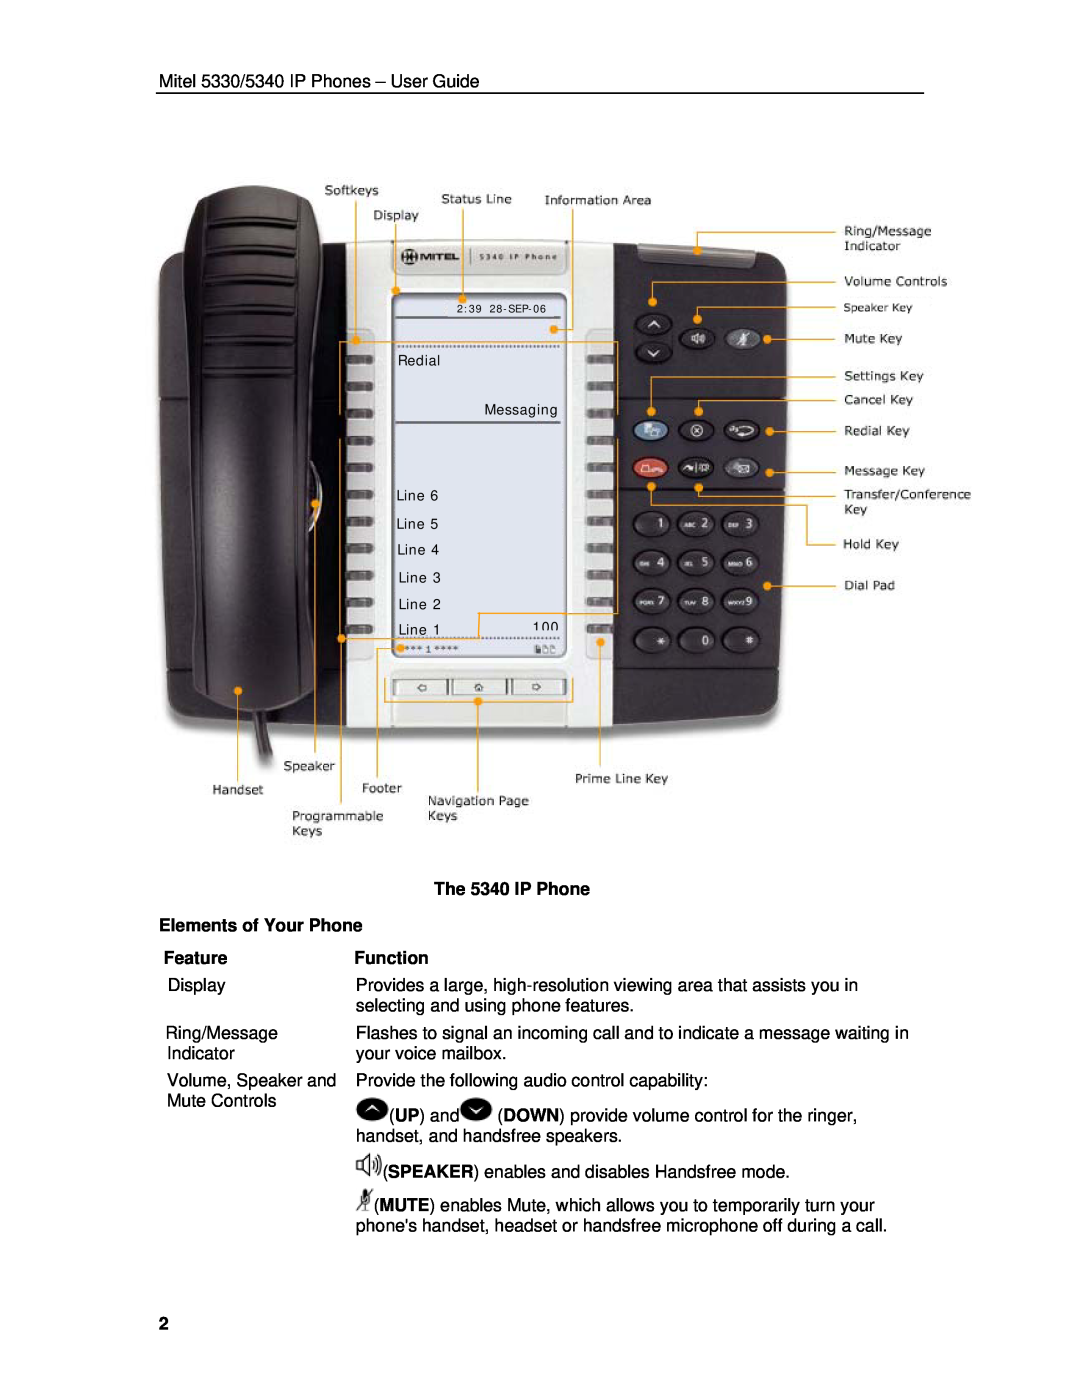 Mitel 5330 manual The 5340 IP Phone, Elements of Your Phone, Feature, Function 